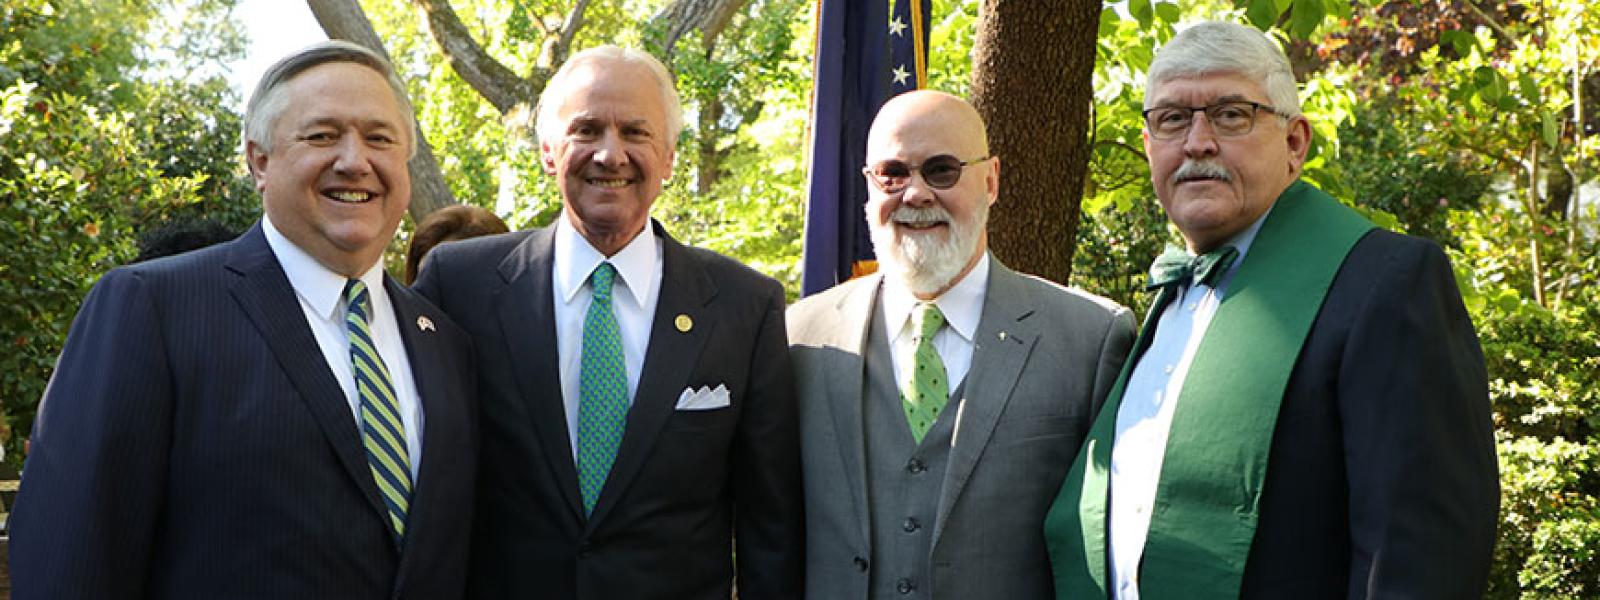 Earth Day 2021 at the Governor's Mansion: CIU President Dr. Mark A. Smith, Gov. Henry McMaster, Tom Mullikin, CIU Chaplaincy Professor Dr. Mike Langston